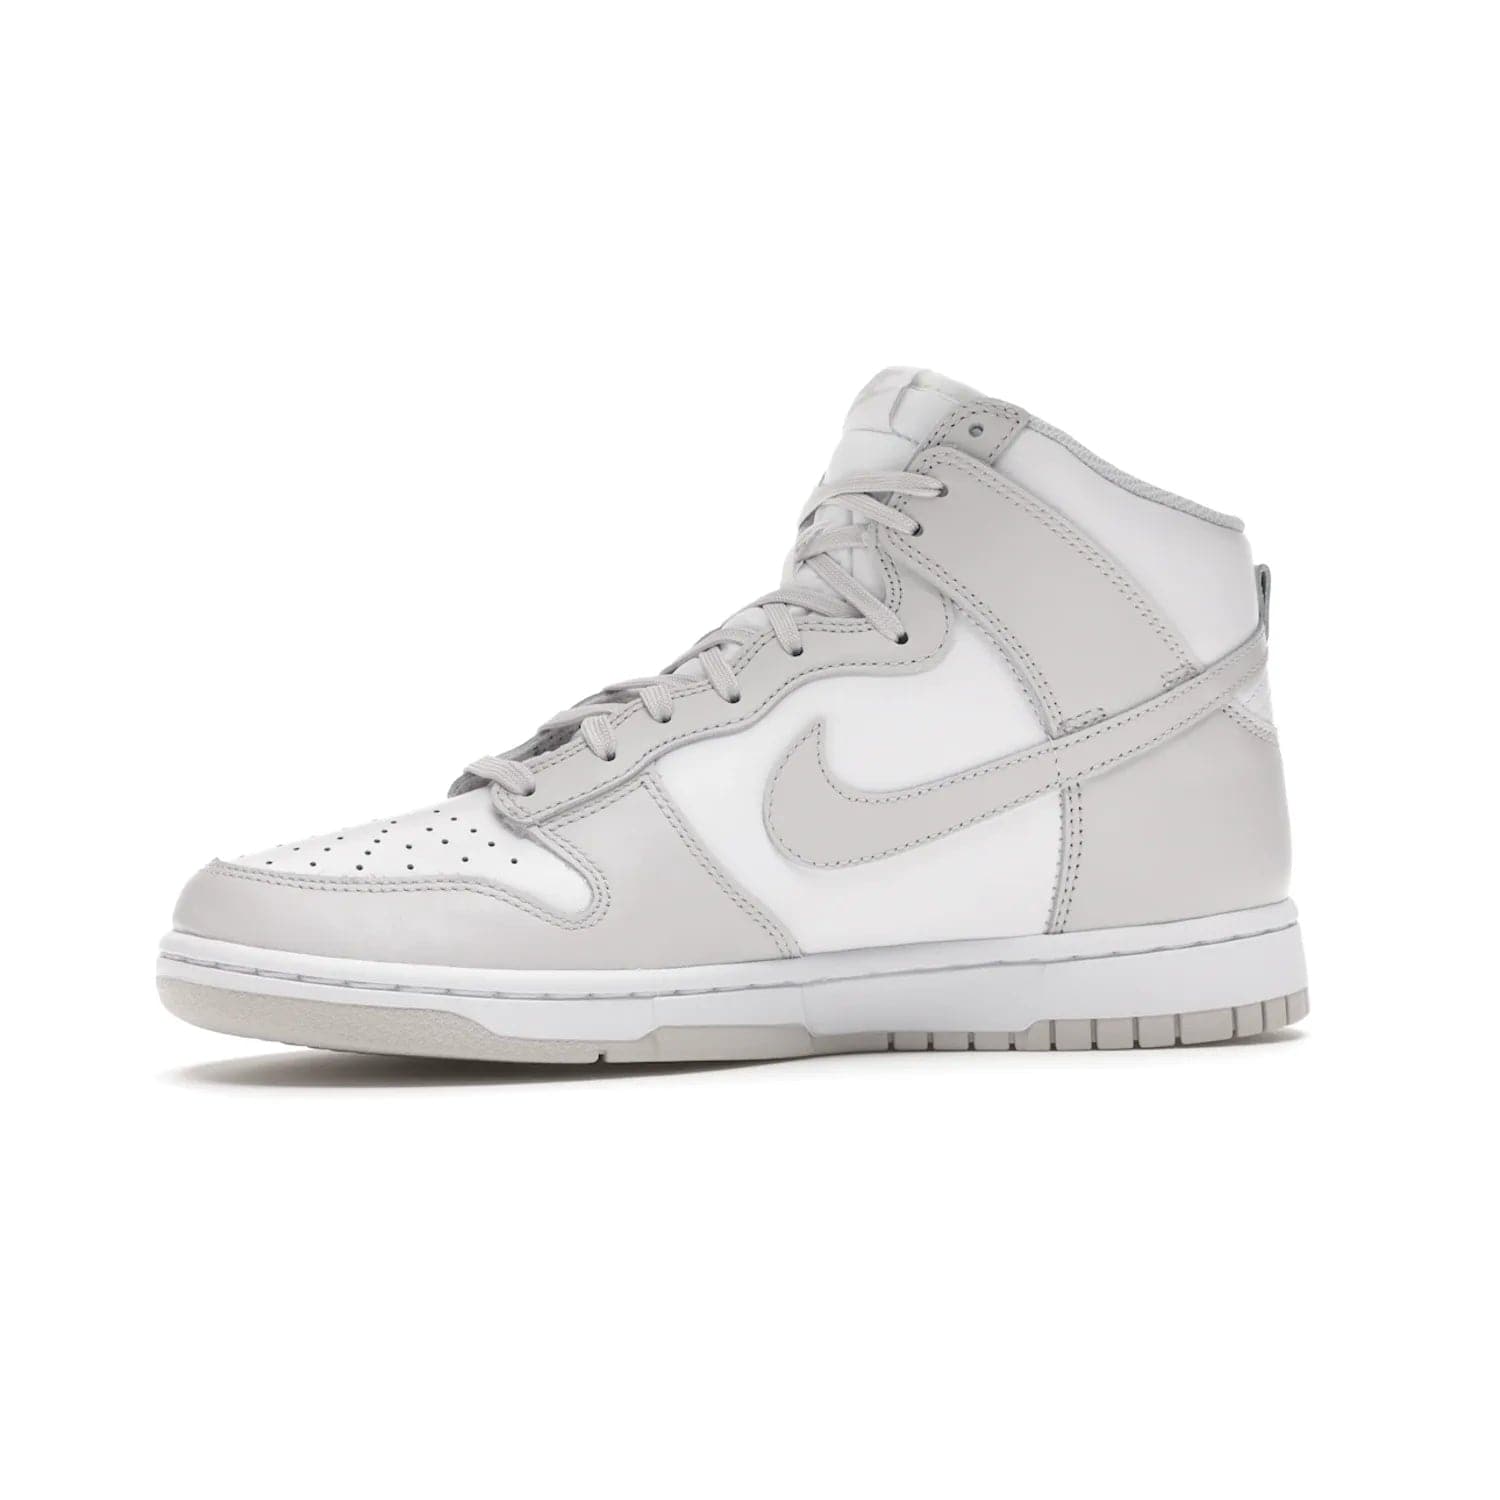 Nike Dunk High Retro White Vast Grey (2021) - Image 17 - Only at www.BallersClubKickz.com - Nike Dunk High Retro White Vast Grey 2021: classic '80s basketball sneaker with a crisp white base, grey overlays, midsole tooling and outsole. Dropped Feb. 2021.